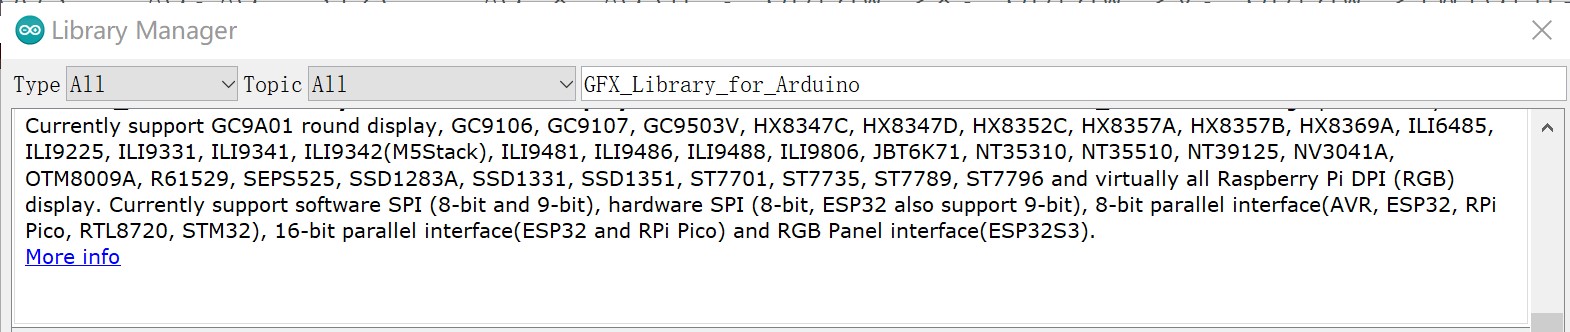 MaTouch_ESP32S3ParallelTFT1.9Inchgfx library.jpg